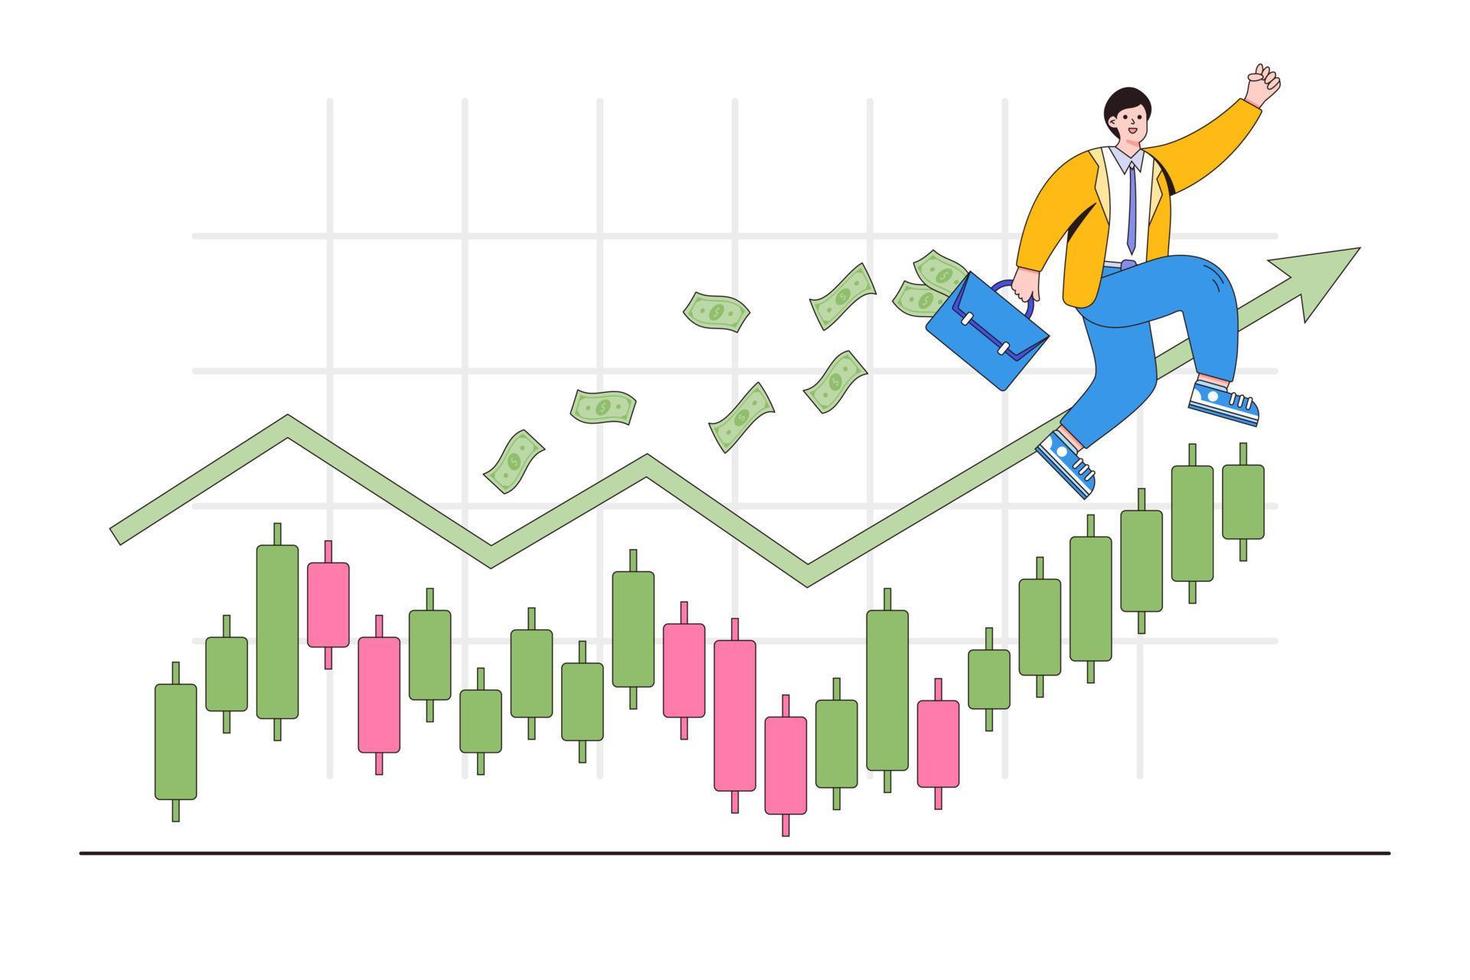 Success online trader, stock market price growth, earn profit from crypto currency investment concepts. Joyful businessman holding money briefcase jump on top candlestick graph with arrow upward vector